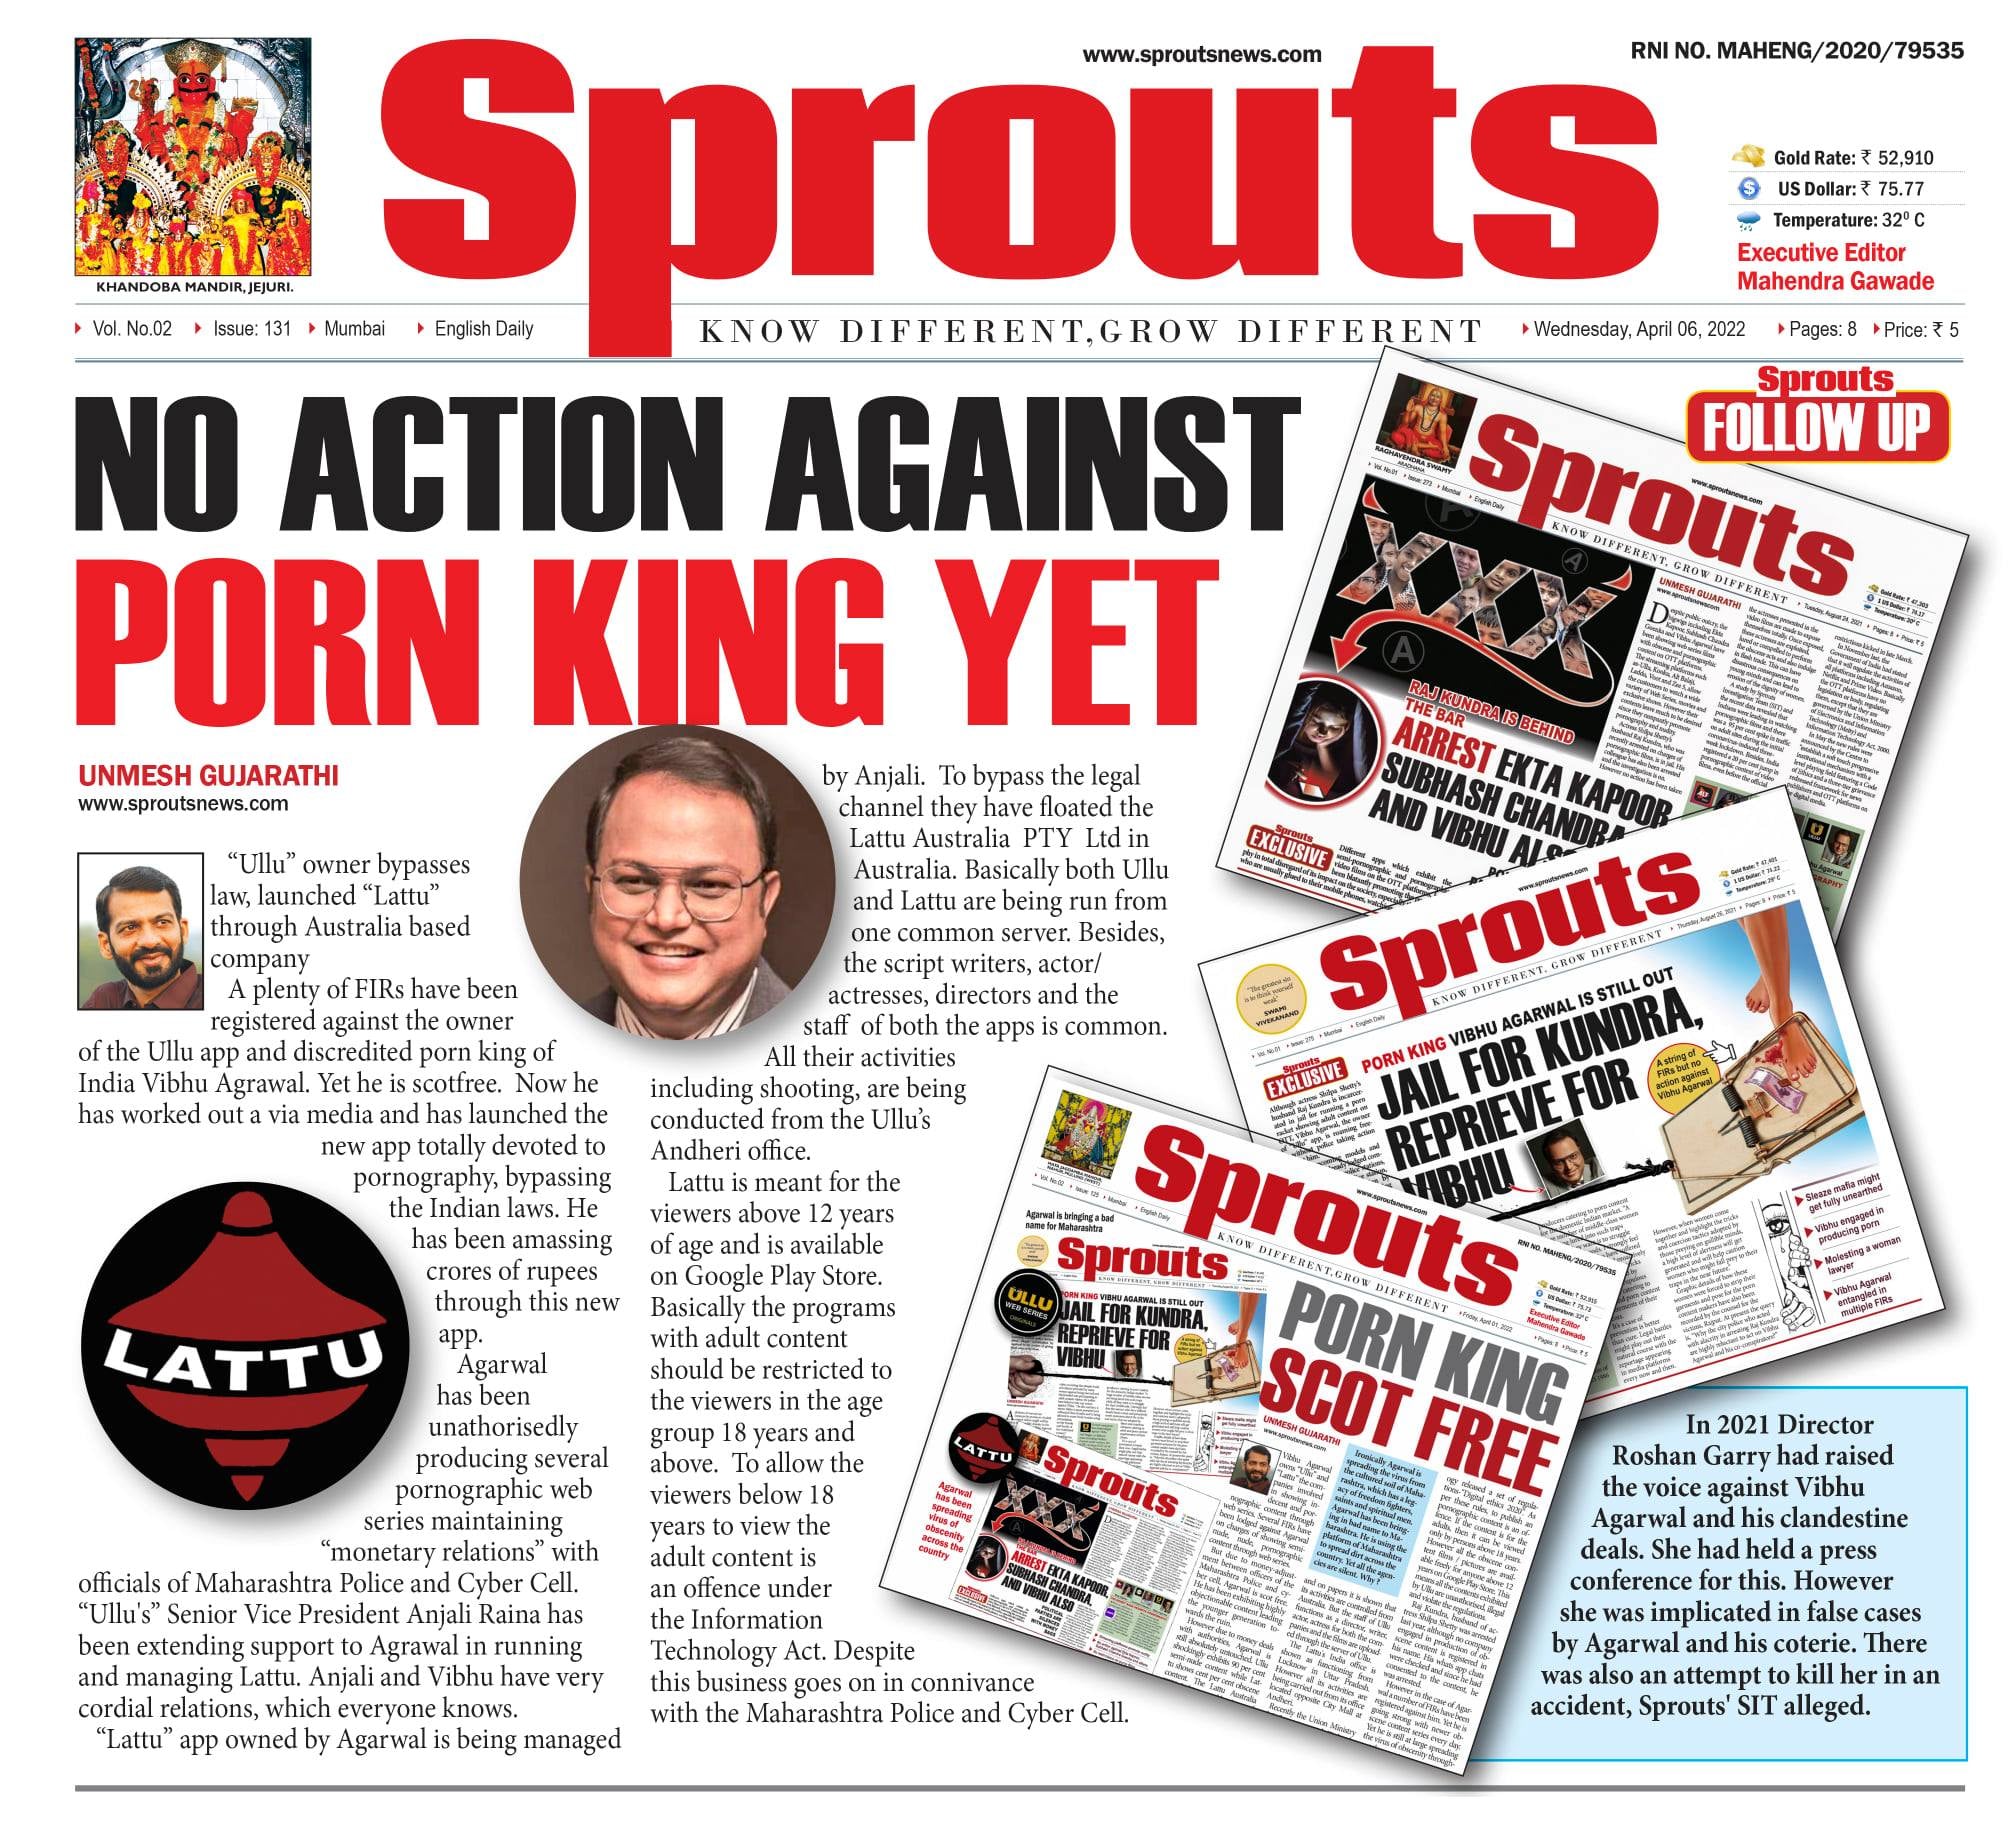 Pornking In - NO ACTION AGAINST PORN KING YET - Sprouts News